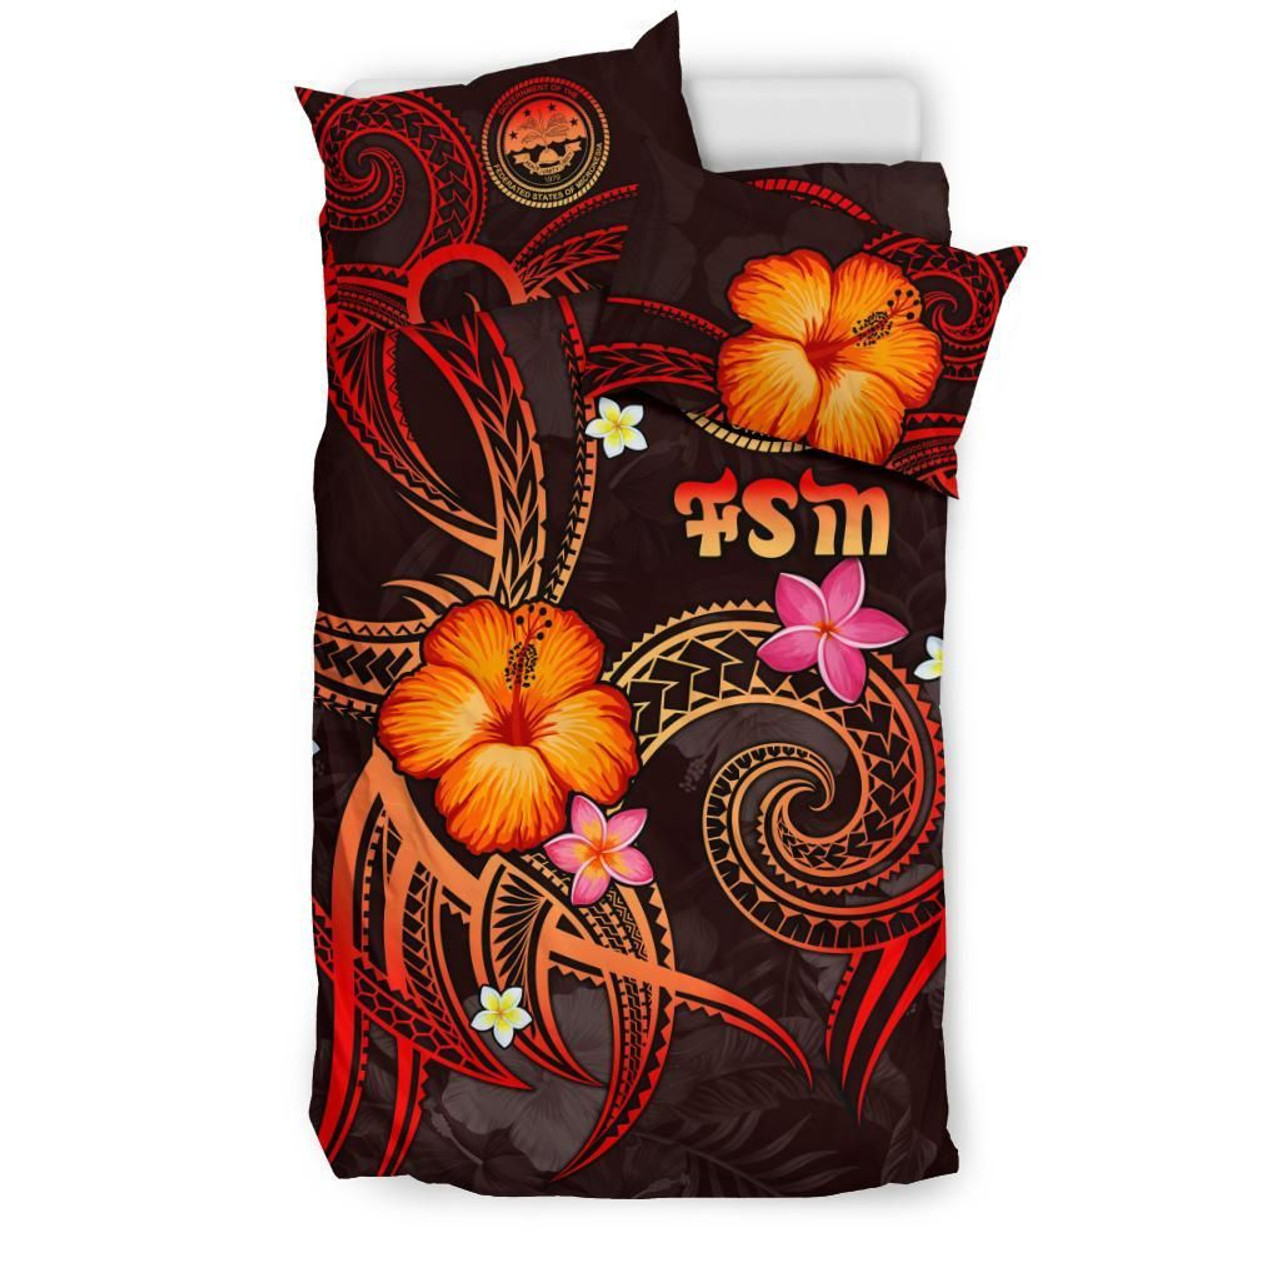 Federated States Of Micronesia Polynesian Bedding Set - Legend Of FSM (Red) 2